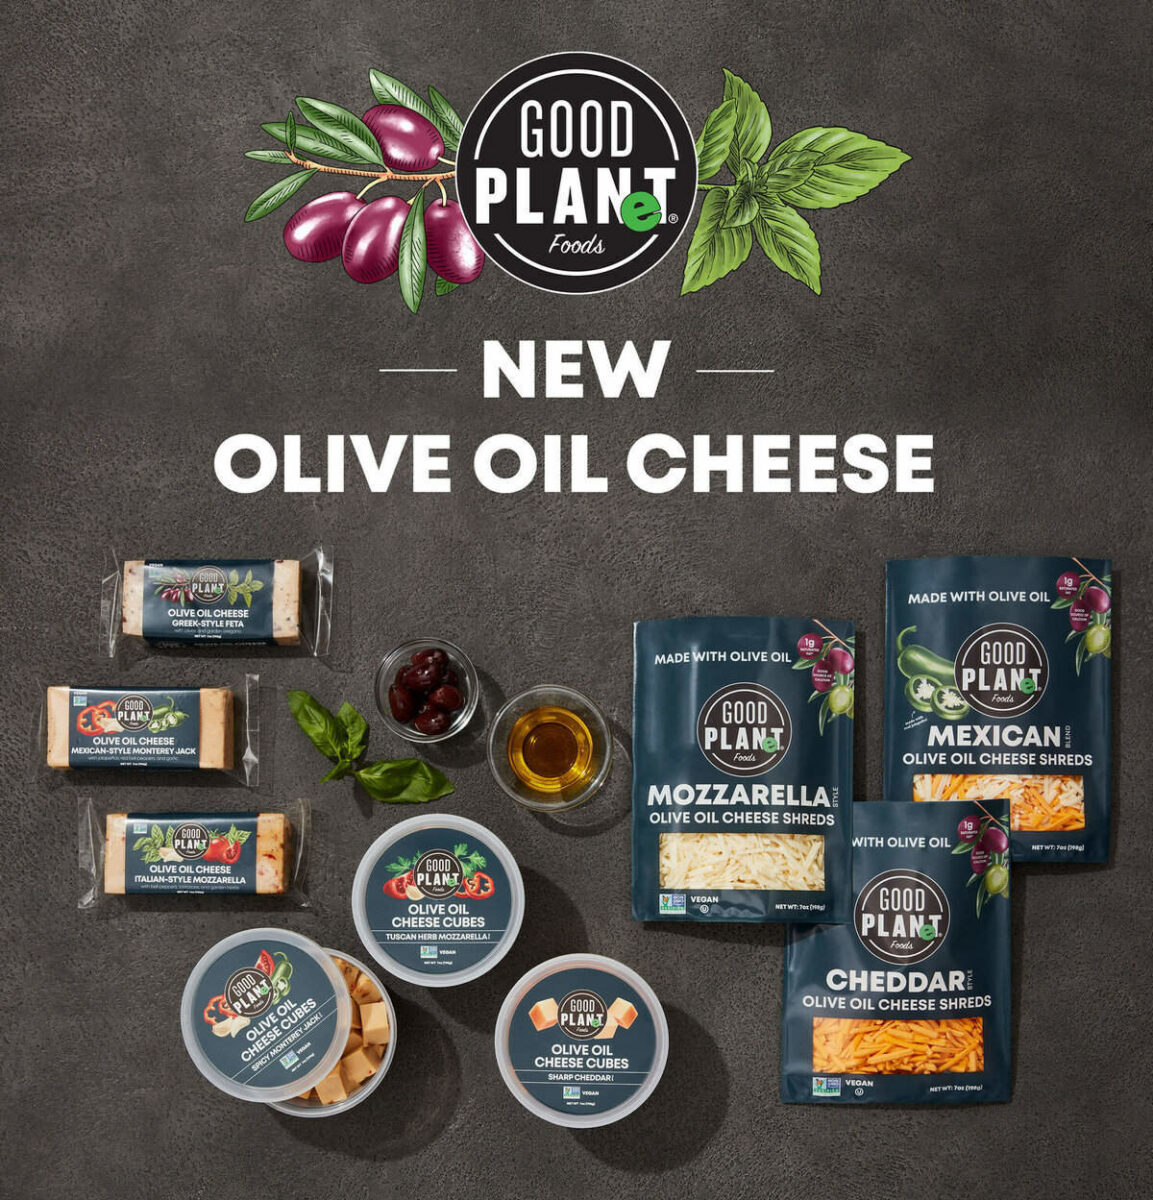 🧀 Good PLANeT Foods unveils vegan olive oil cheese! #VeganCheese #GoodPLANeTFoods #DairyFree 

🫒Check it out now! ⬇️
westfaironline.com/food-beverage/…